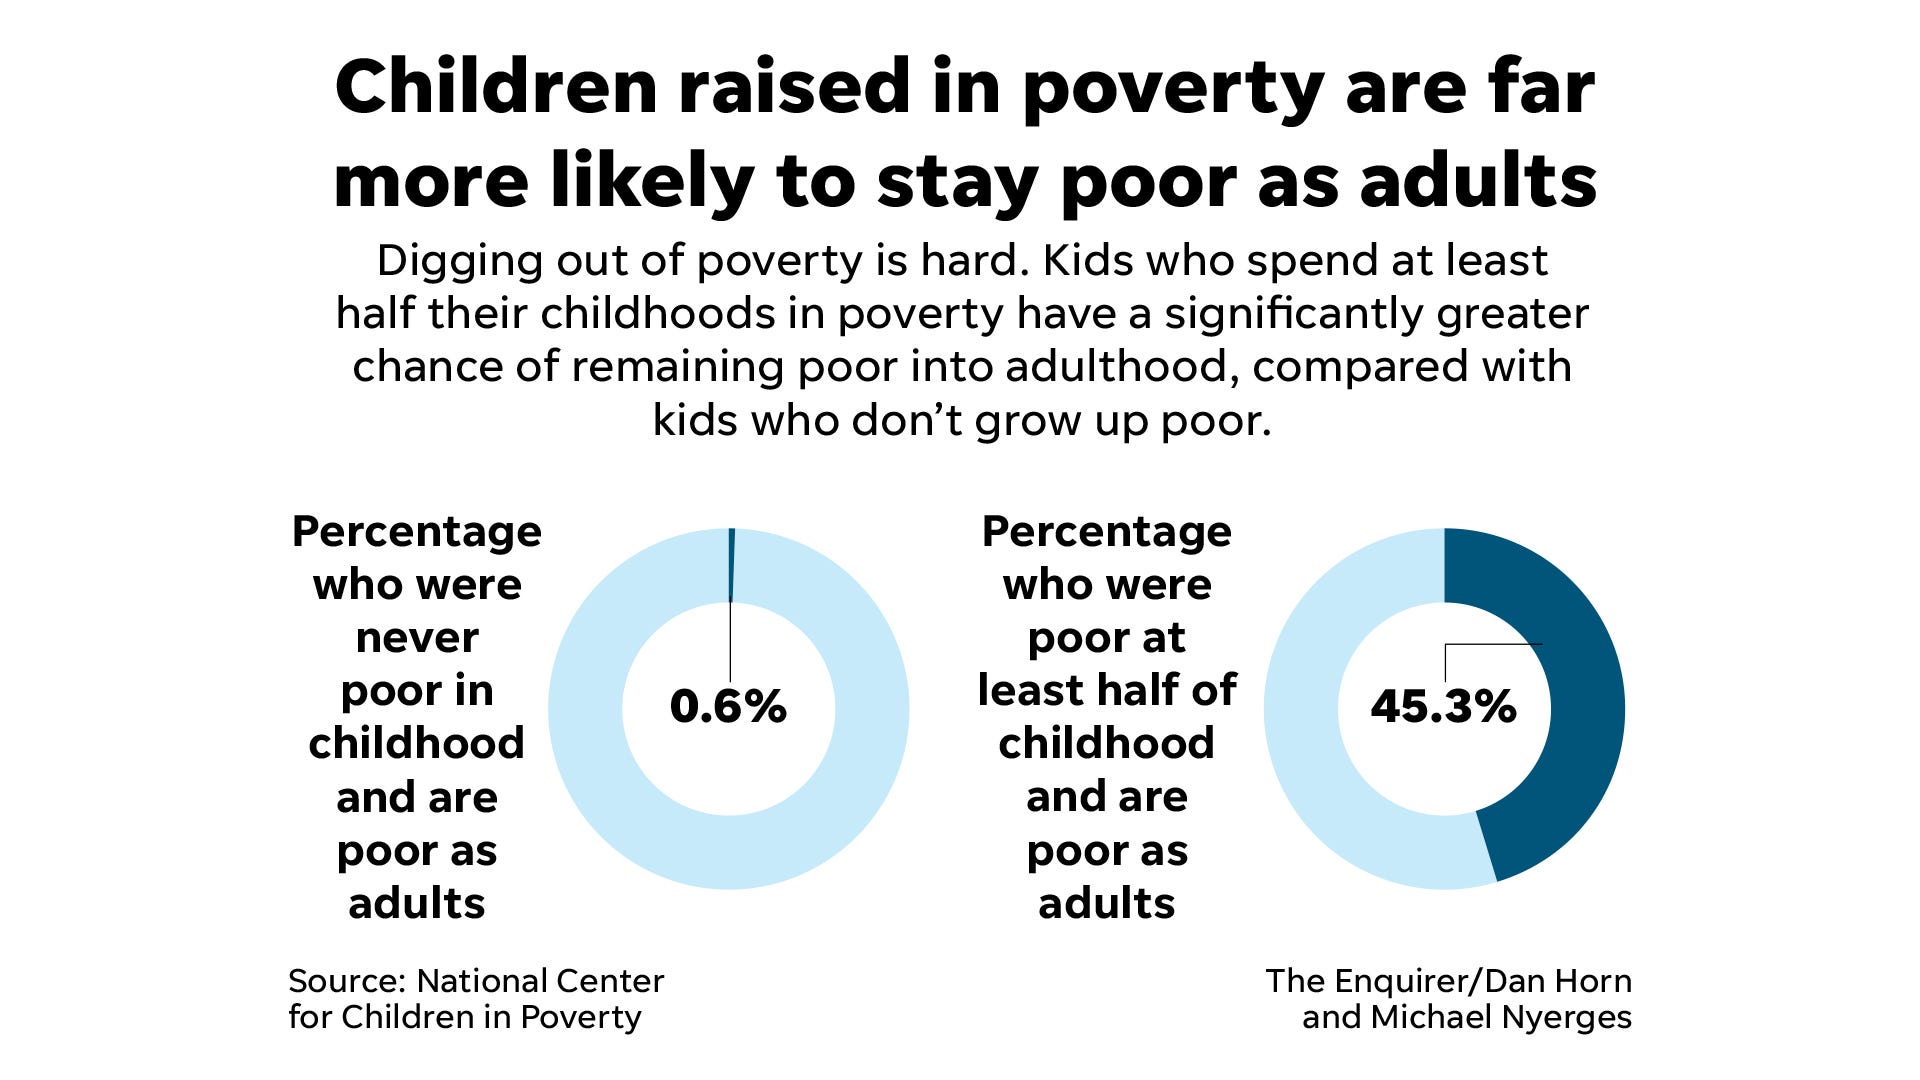 Children raised in poverty are far more likely to stay poor as adults.